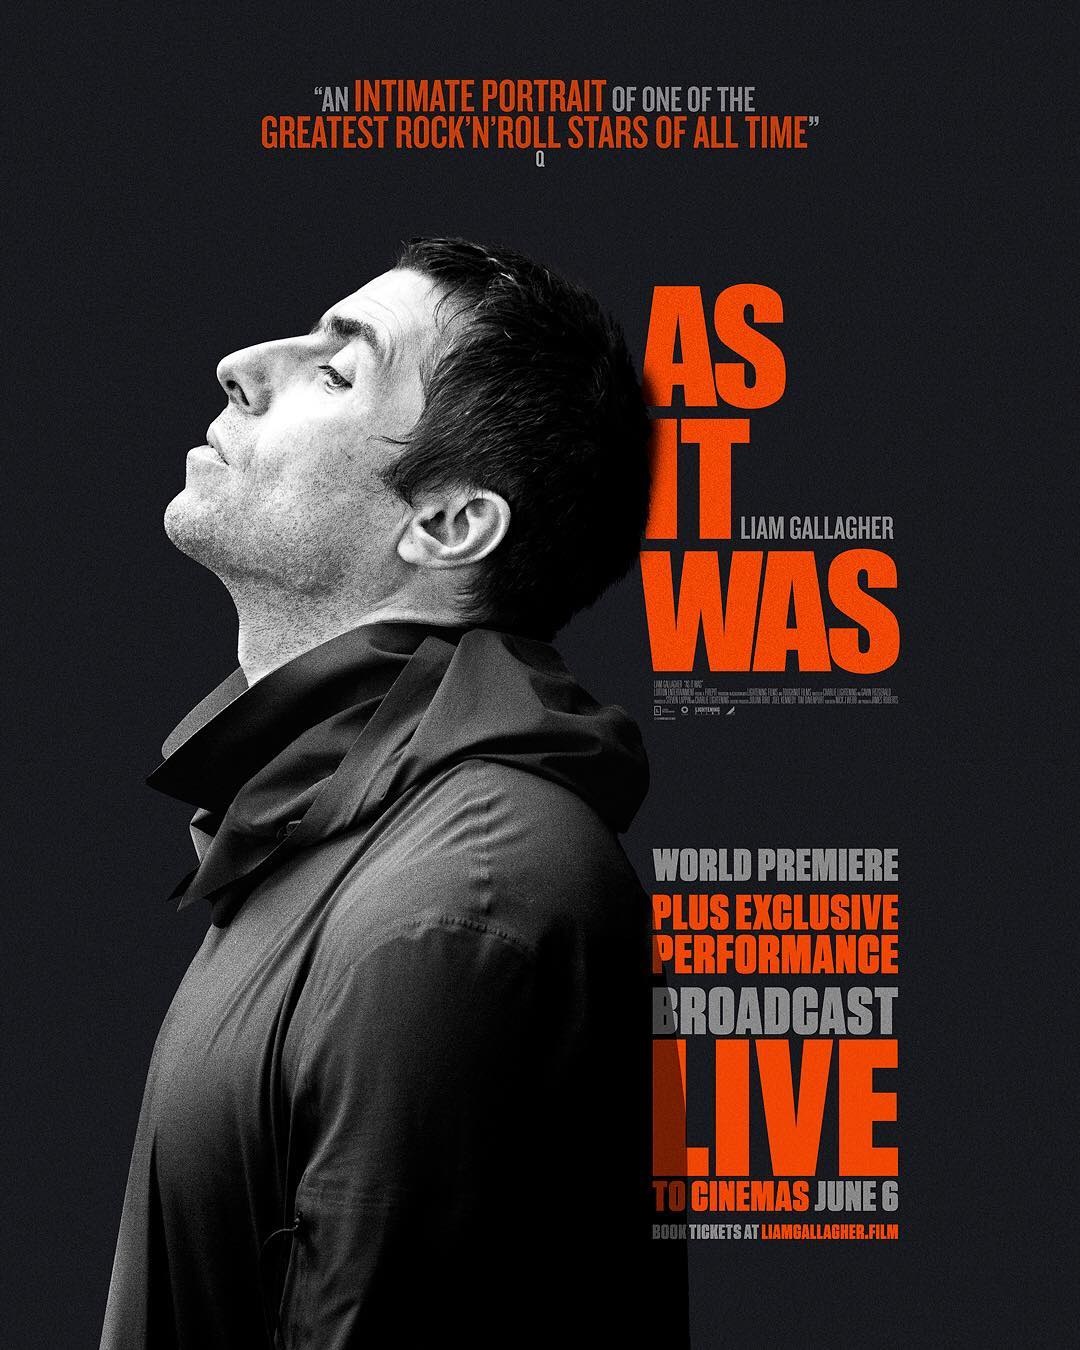 Tickets for “As It Was” and Liam Gallagher’s live performance on sale today ...